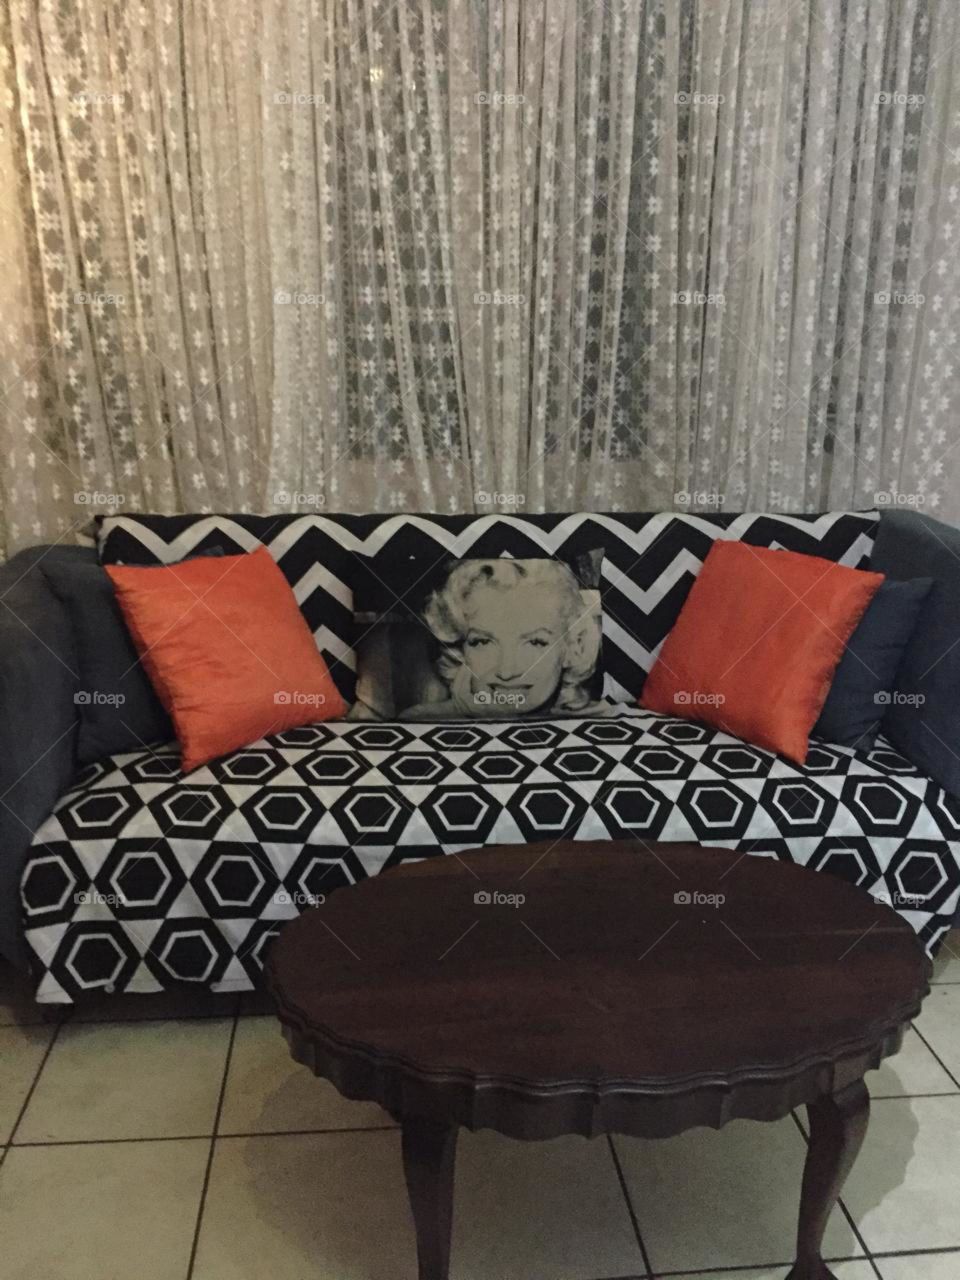 decorating the couch